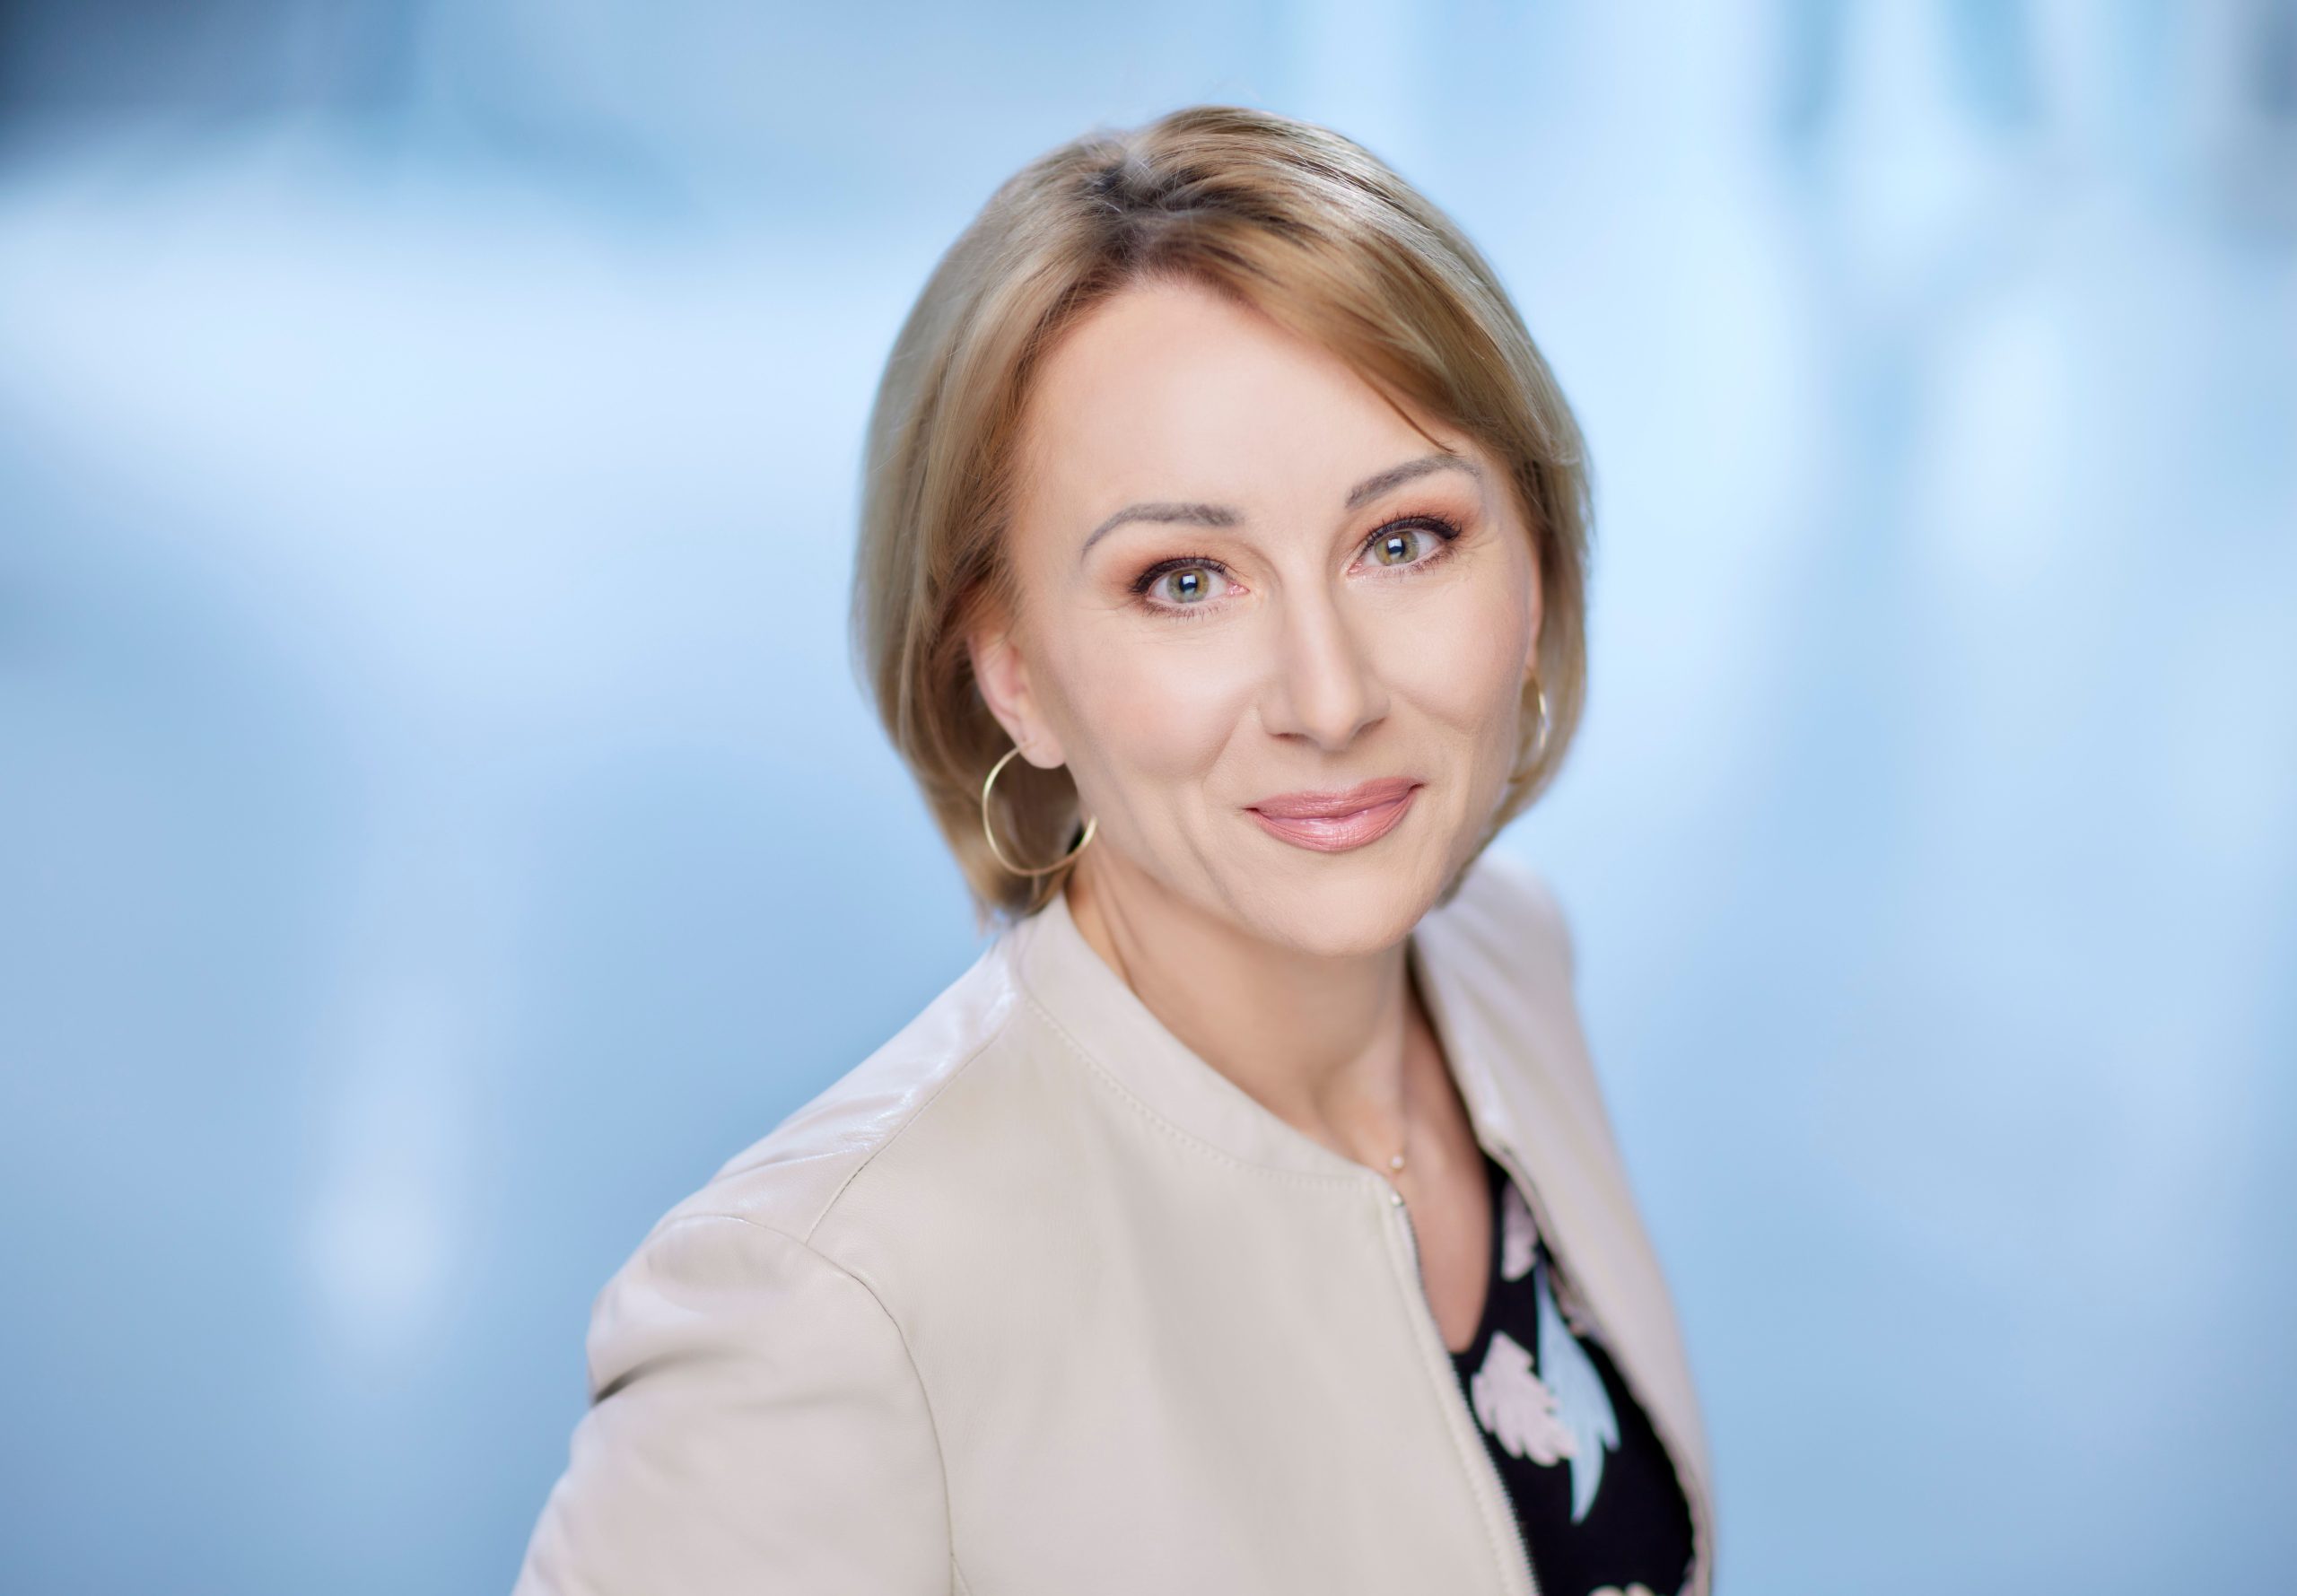 Woman and career: a recipe for success. Interview with Karolina Szmidt, President Henkel Poland